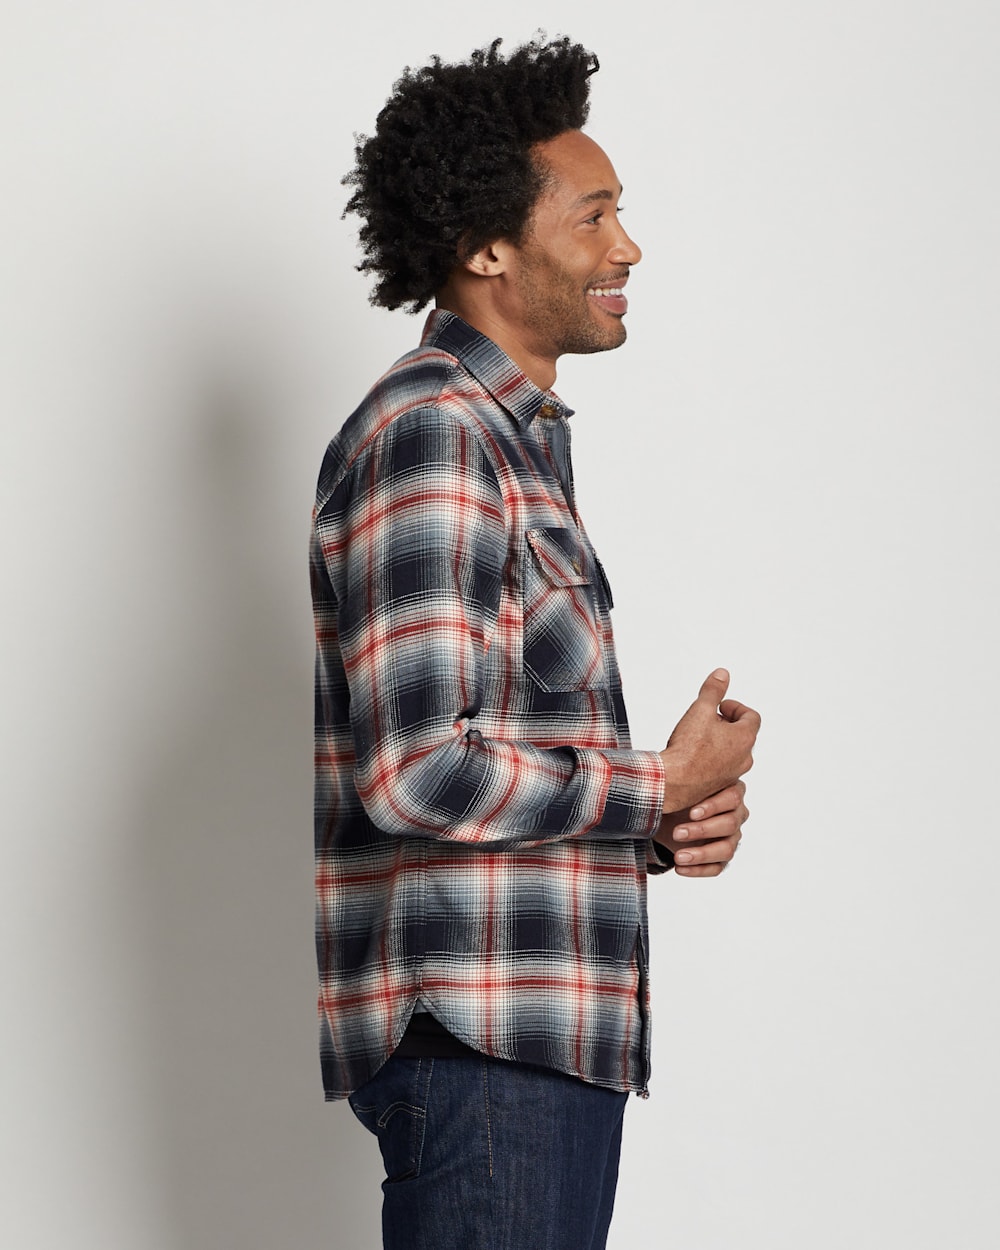 ALTERNATE VIEW OF MEN'S PLAID BURNSIDE DOUBLE-BRUSHED FLANNEL SHIRT IN NAVY/IVORY/RED PLAID image number 4